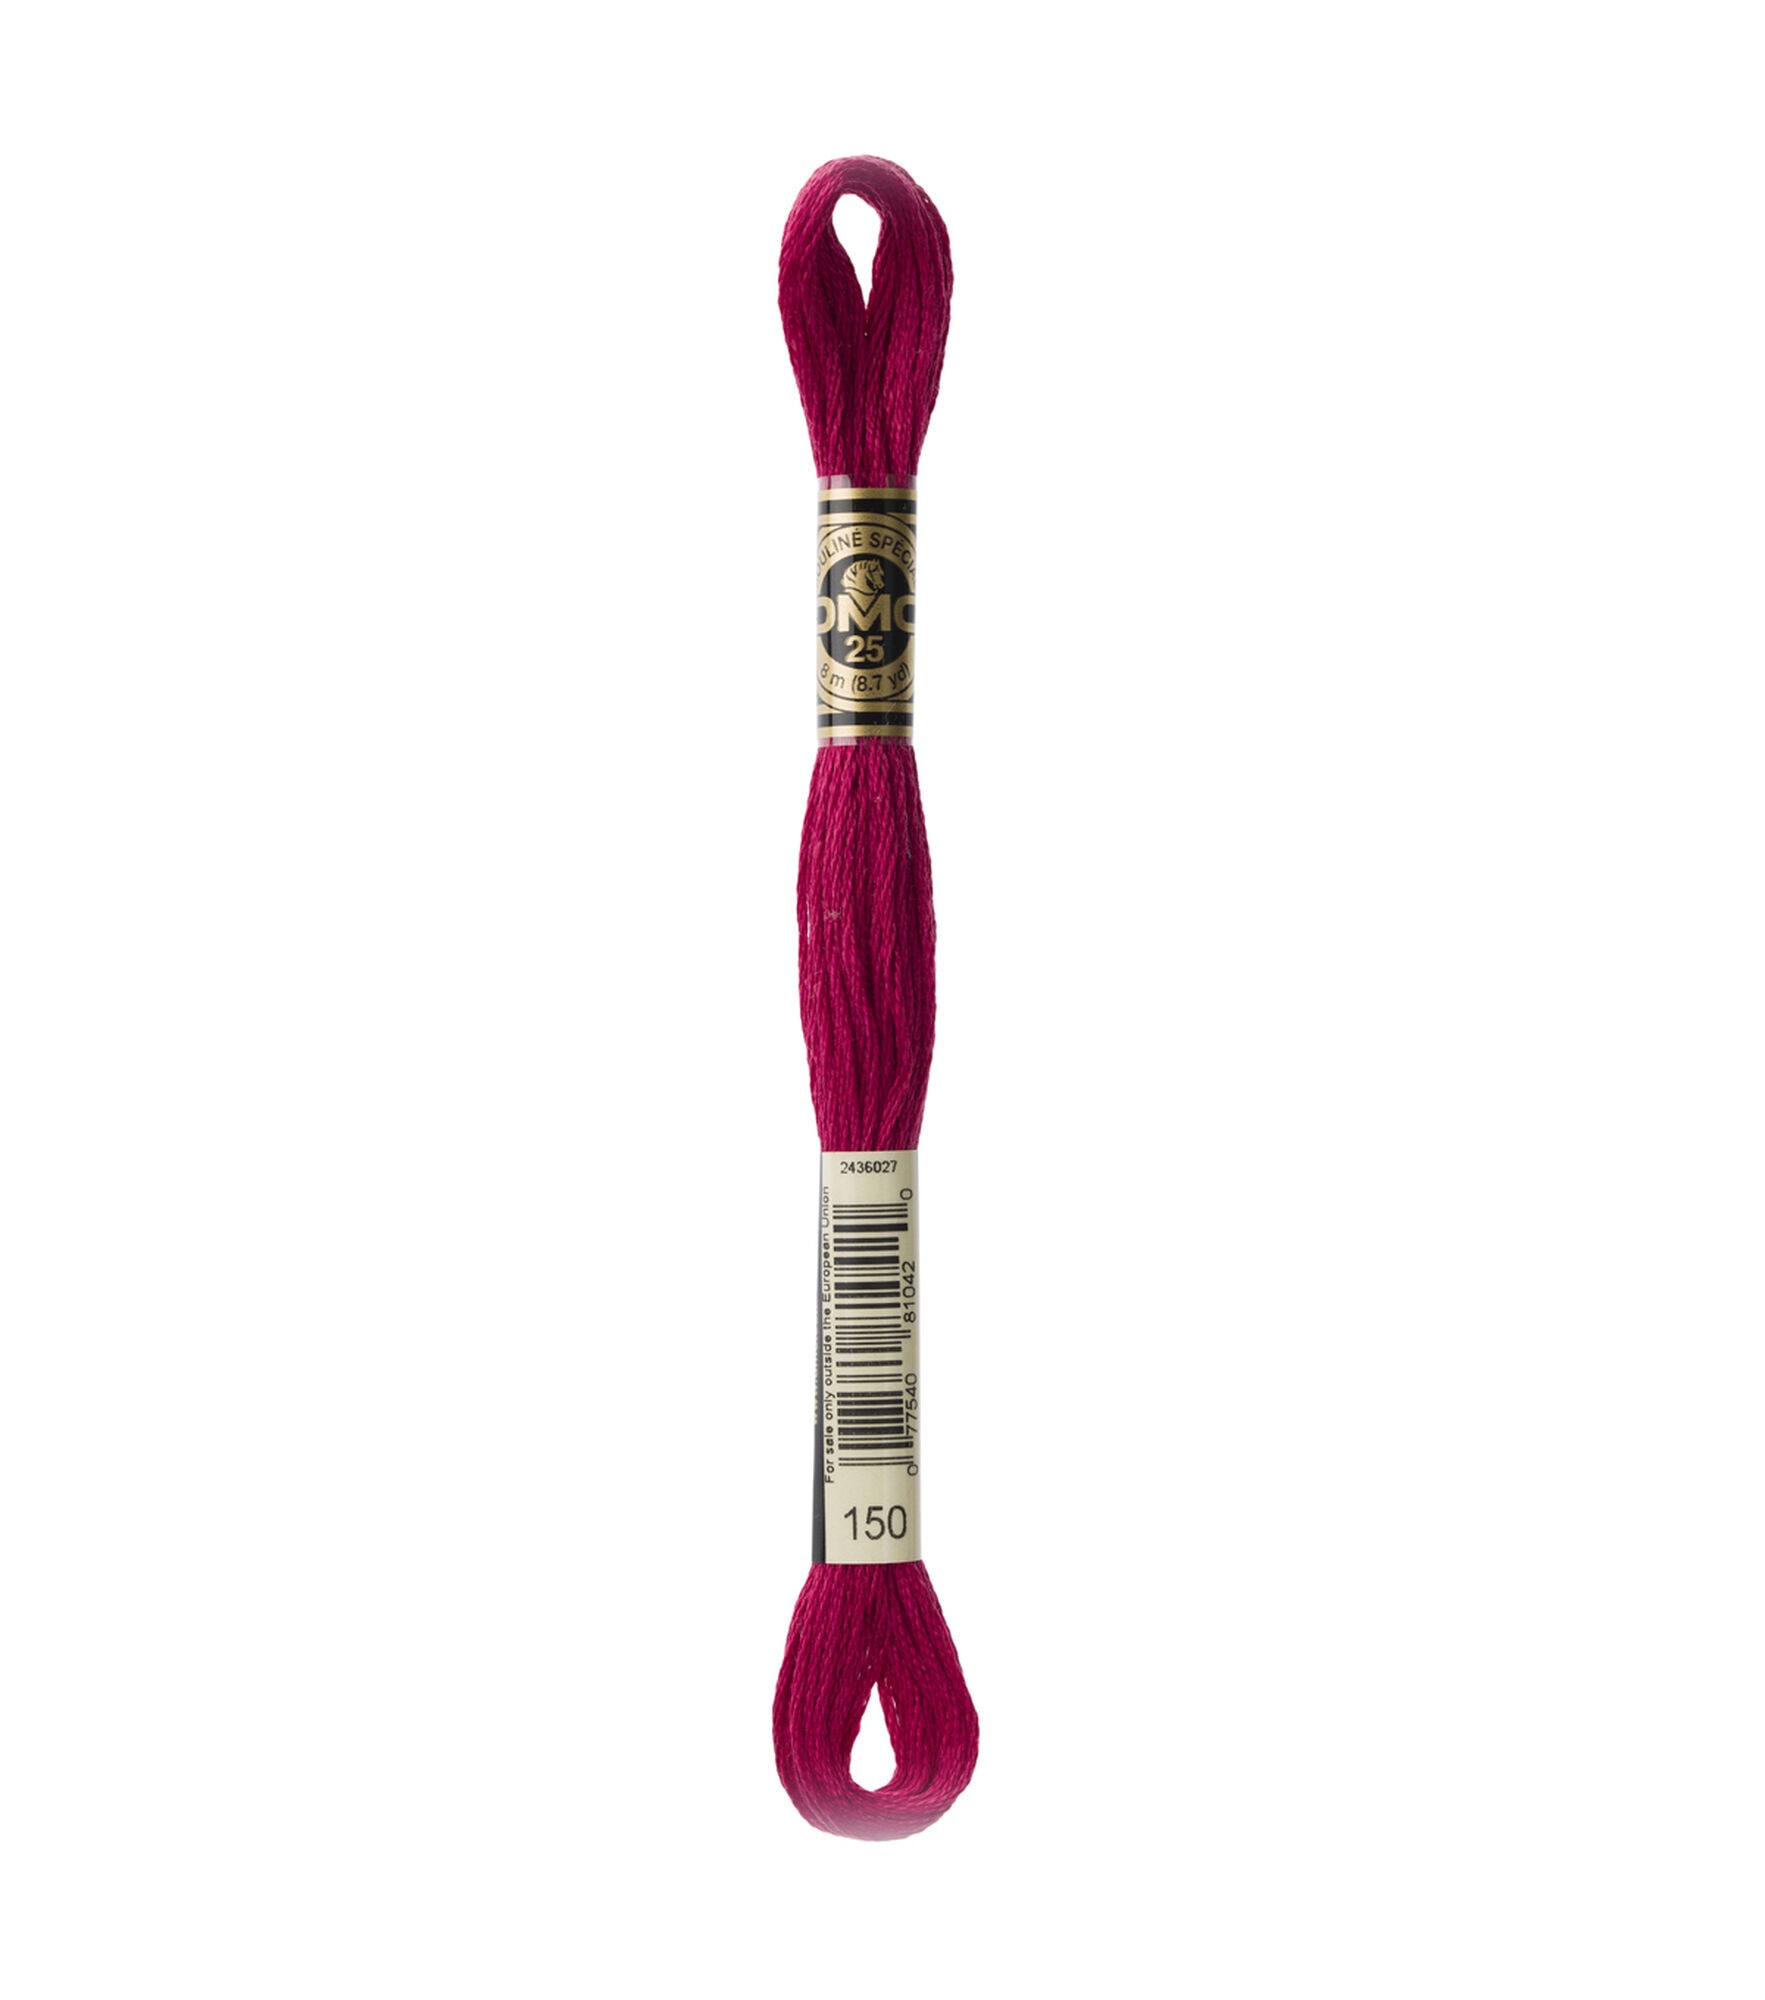 DMC 8.7yd Reds 6 Strand Cotton Embroidery Floss, 150 Dark Dusty Rose, hi-res